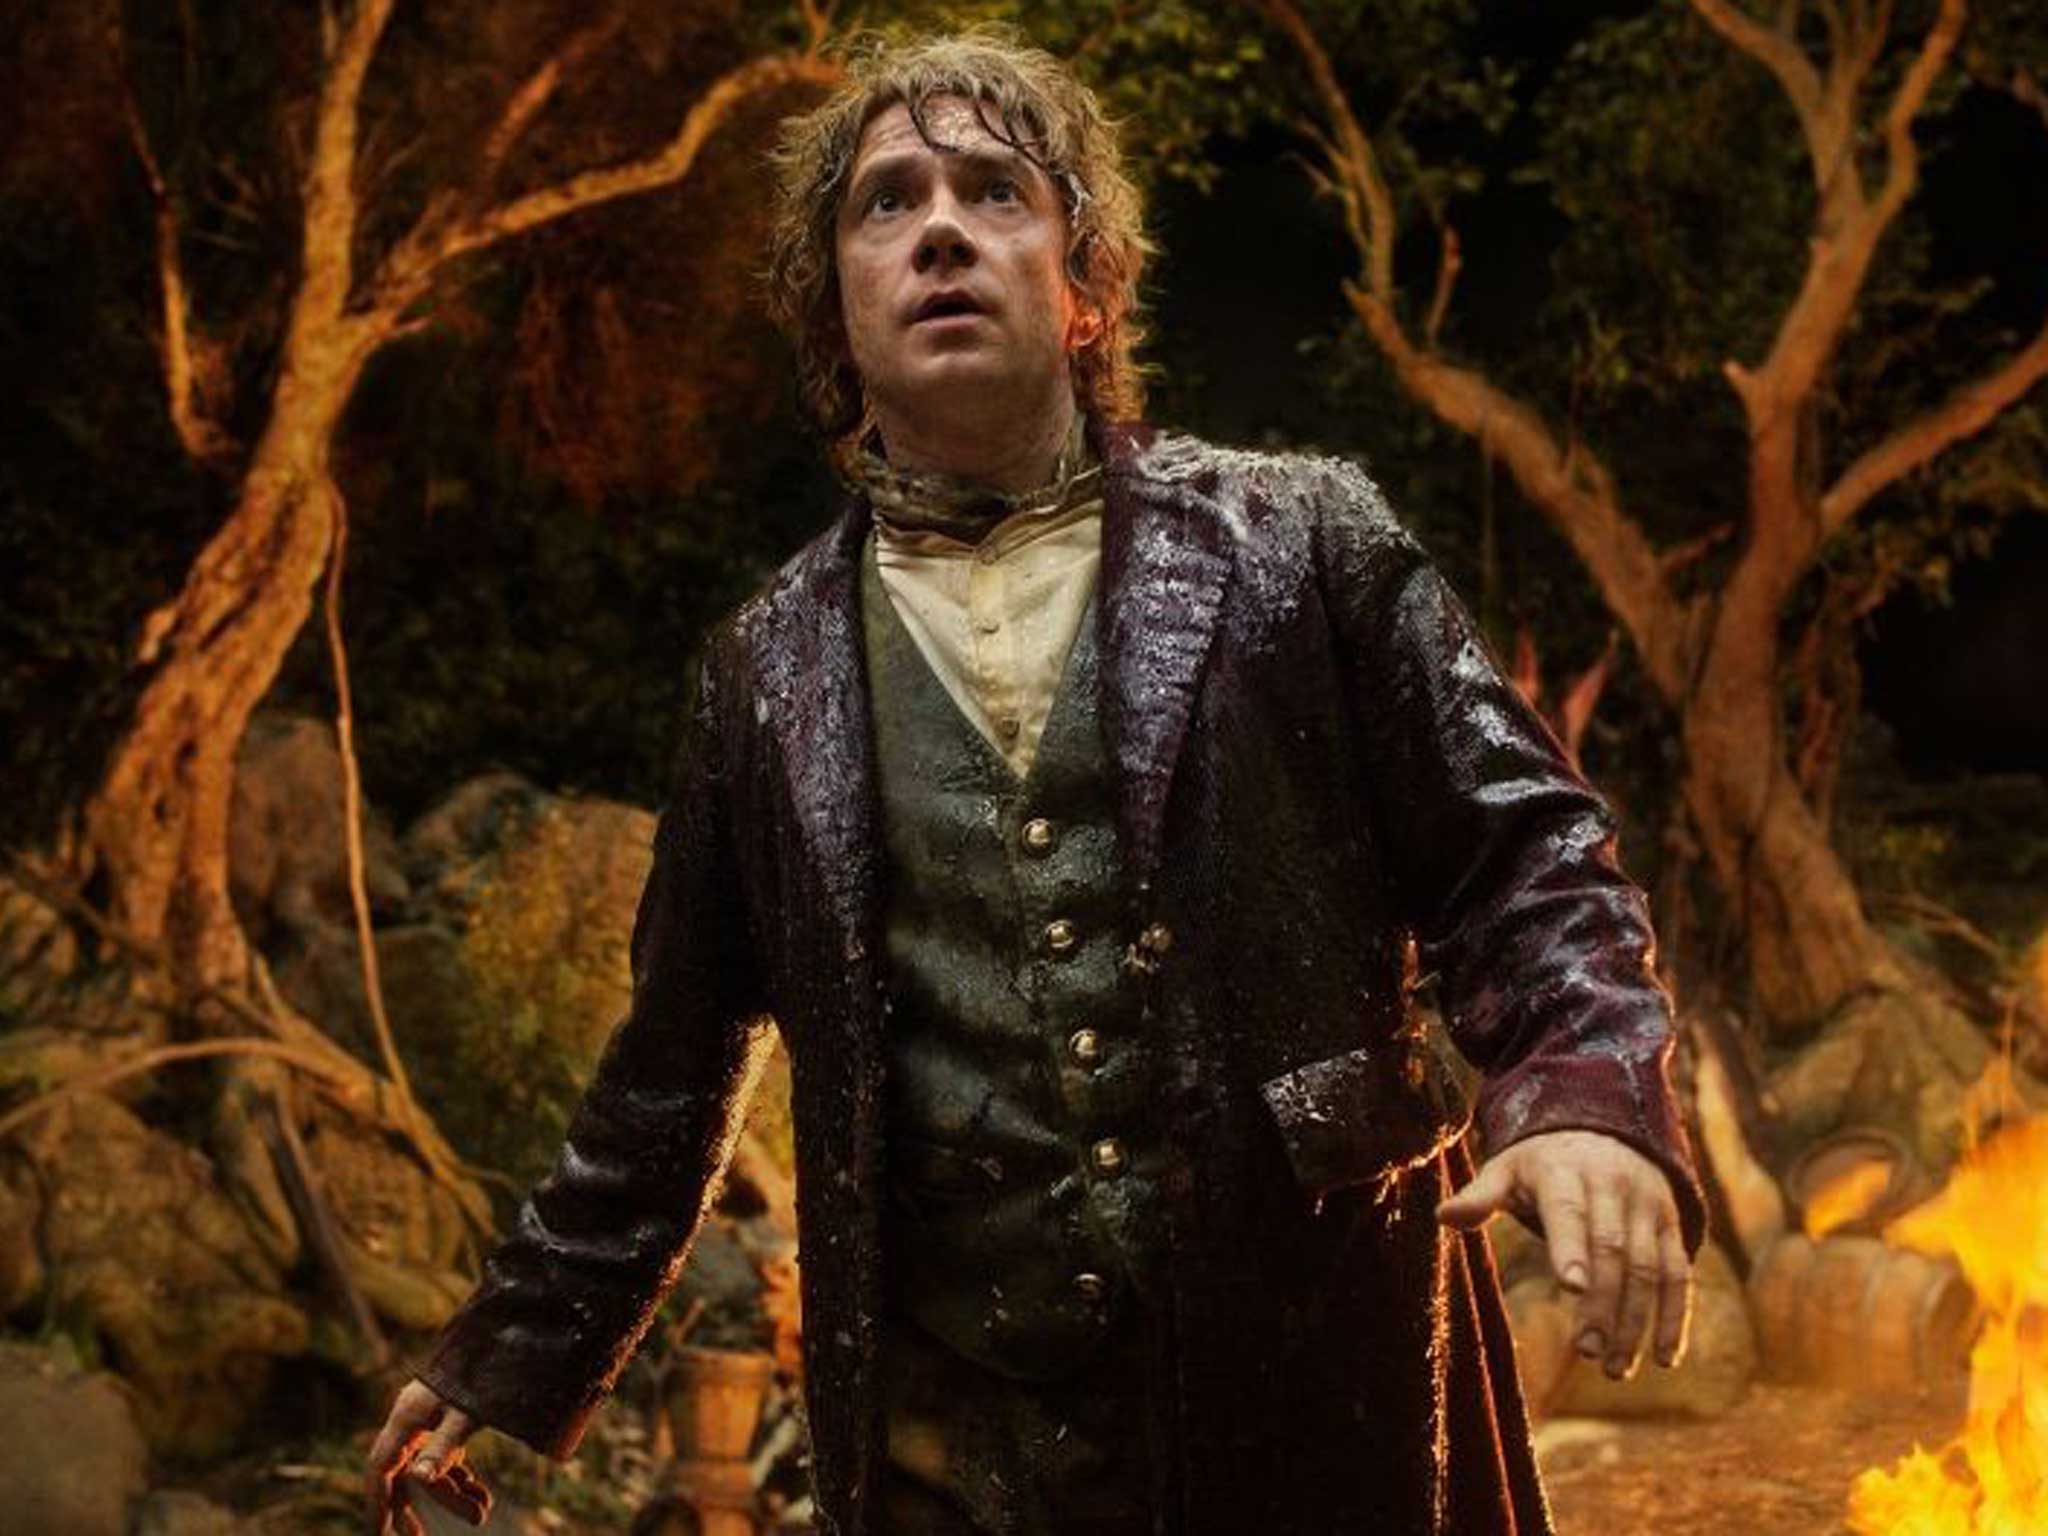 Martin Freeman playing the character in the ‘Hobbit’ film